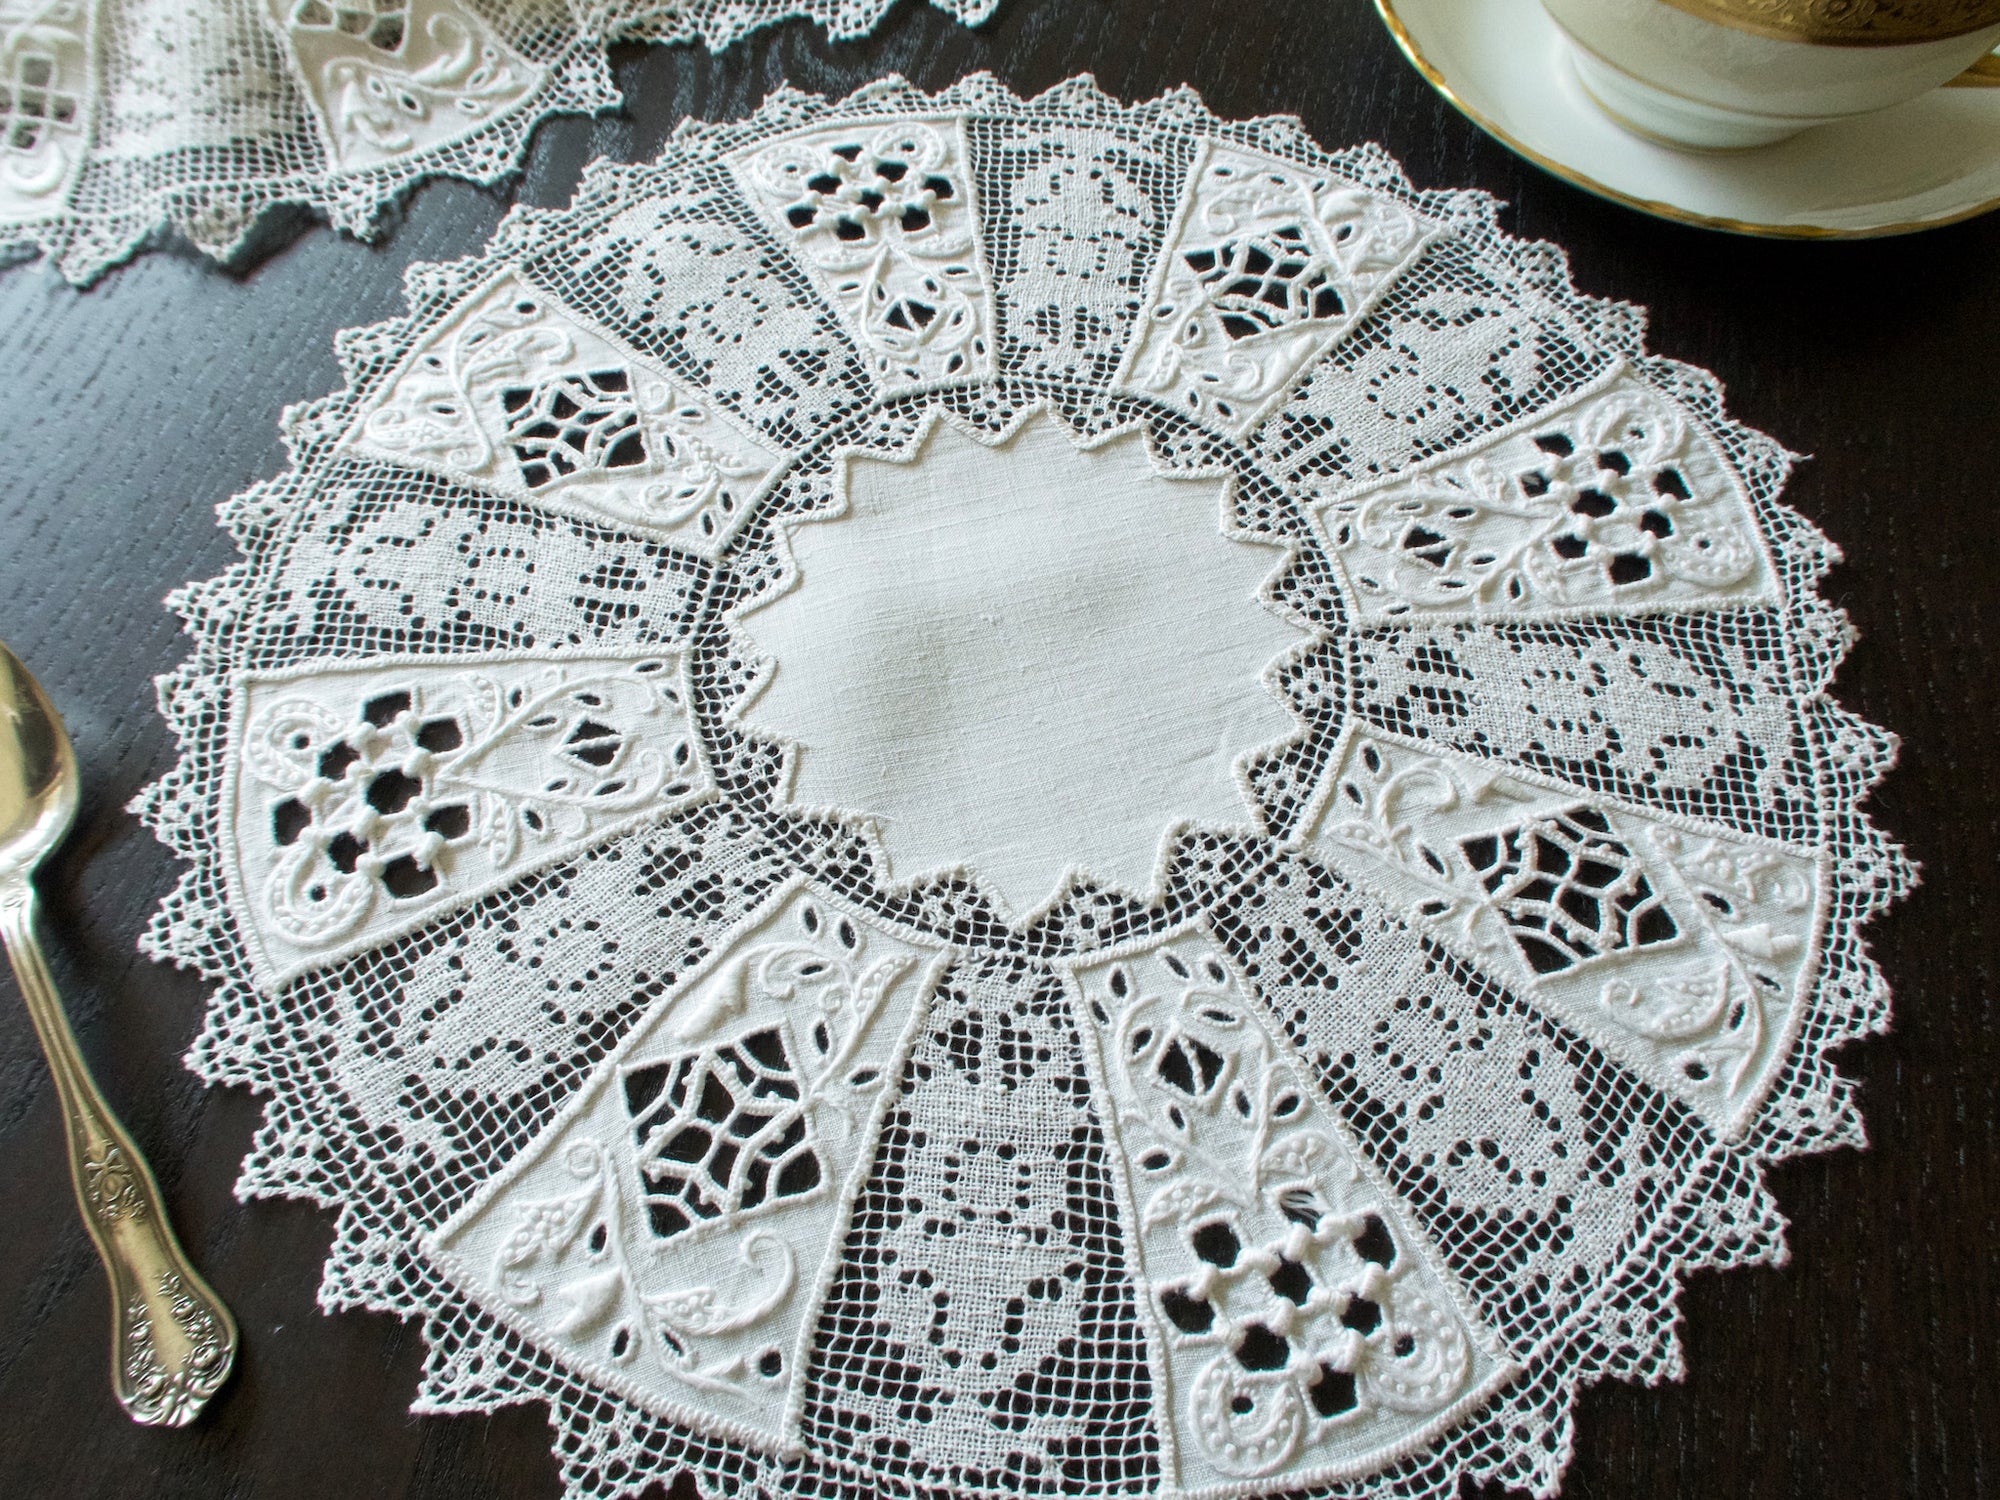 Antique Ornate Mixed Lace & Linen 10.5" Round Placemats Set of 12